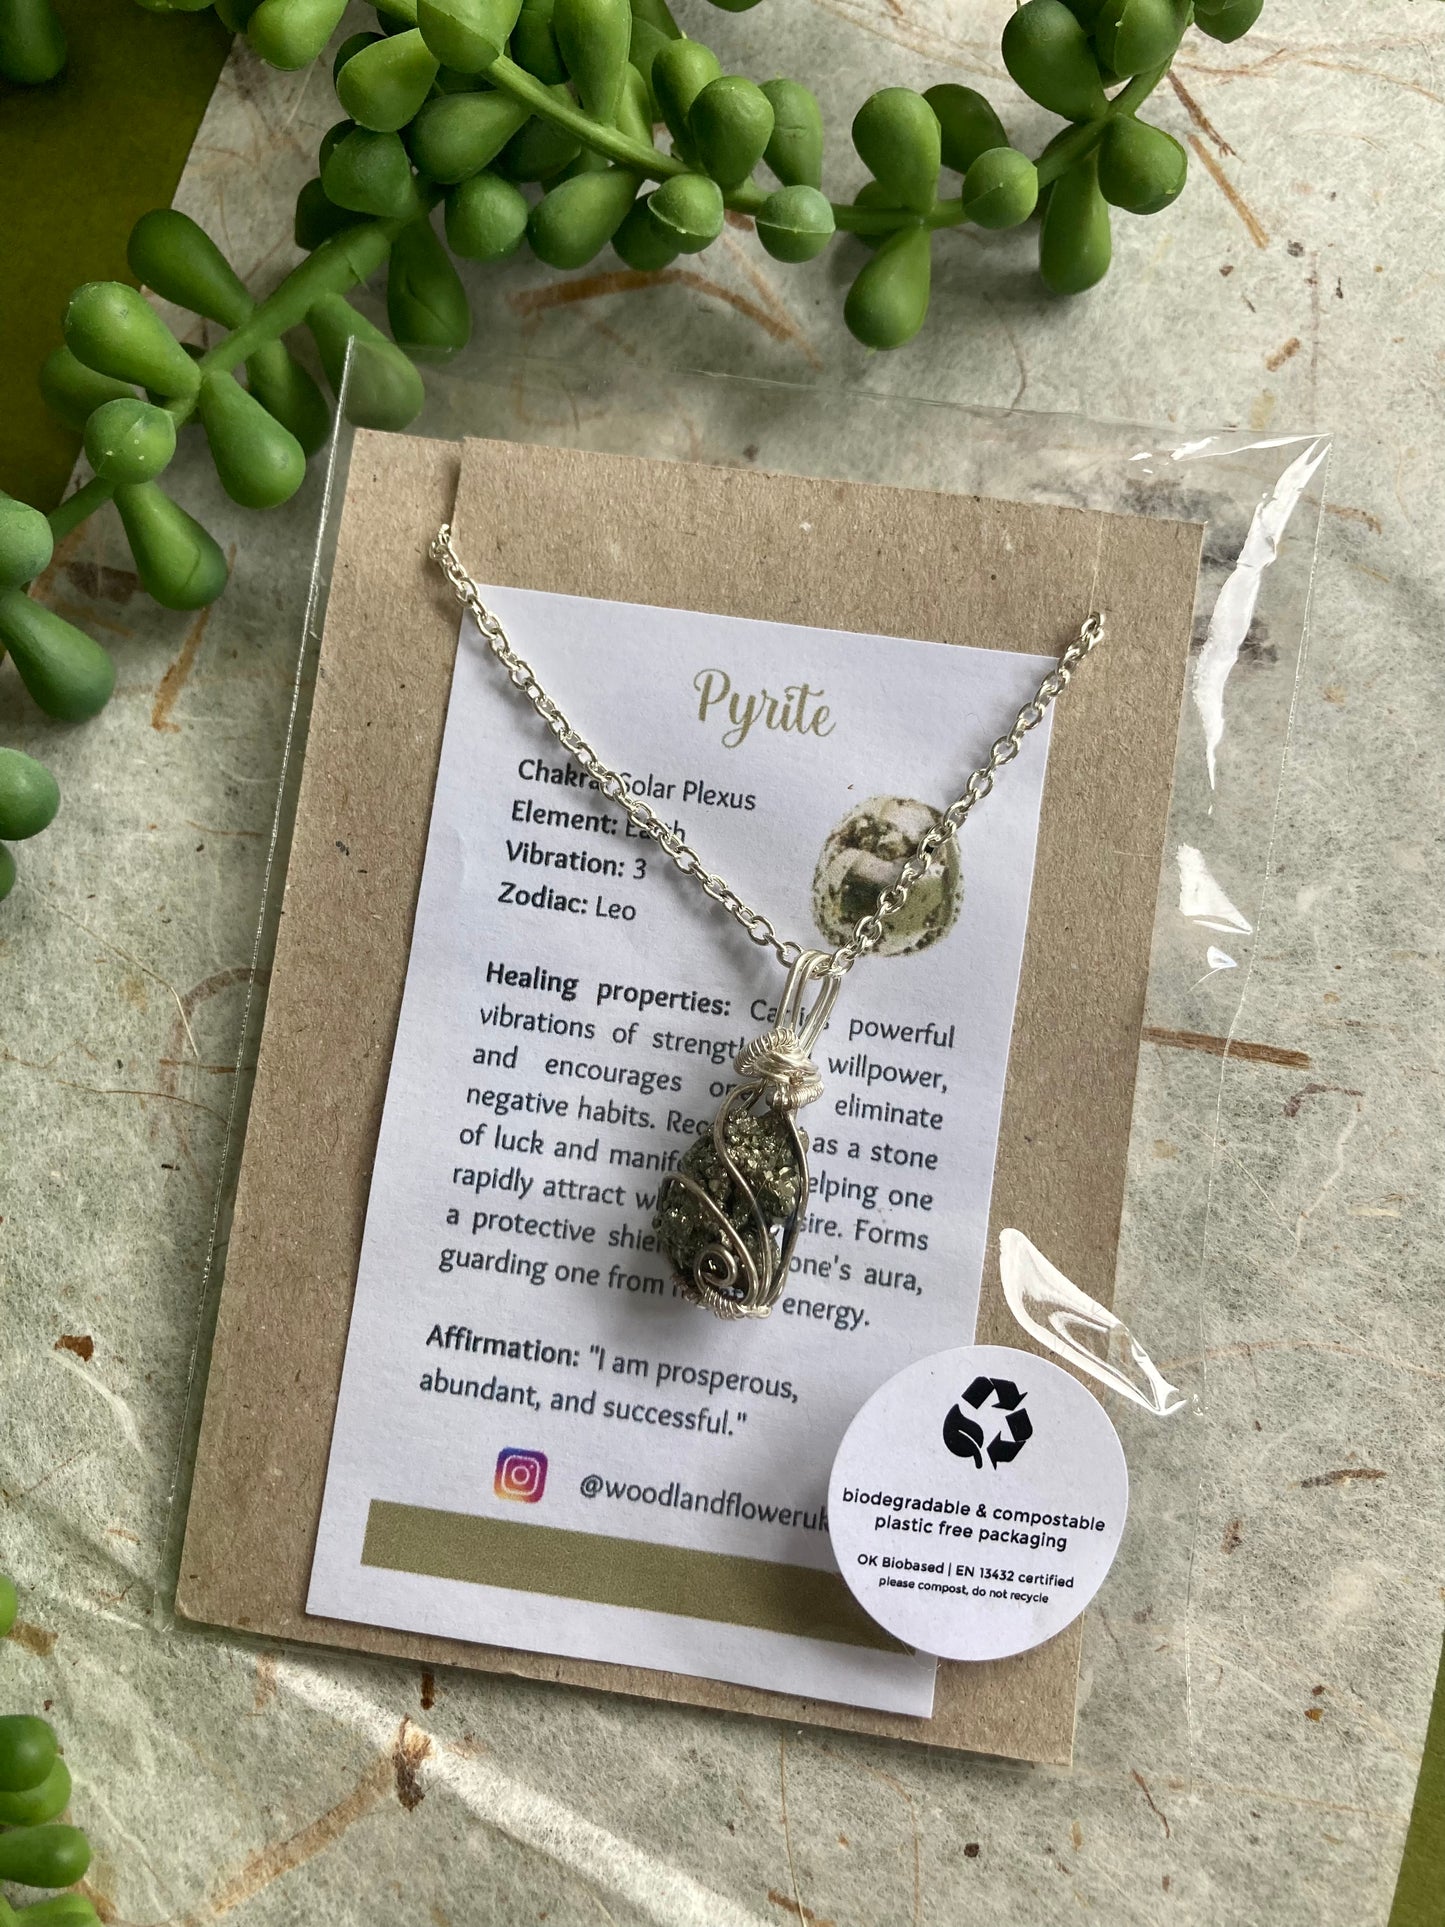 Pyrite necklace silver plated wire wrapped 18 inch length chain